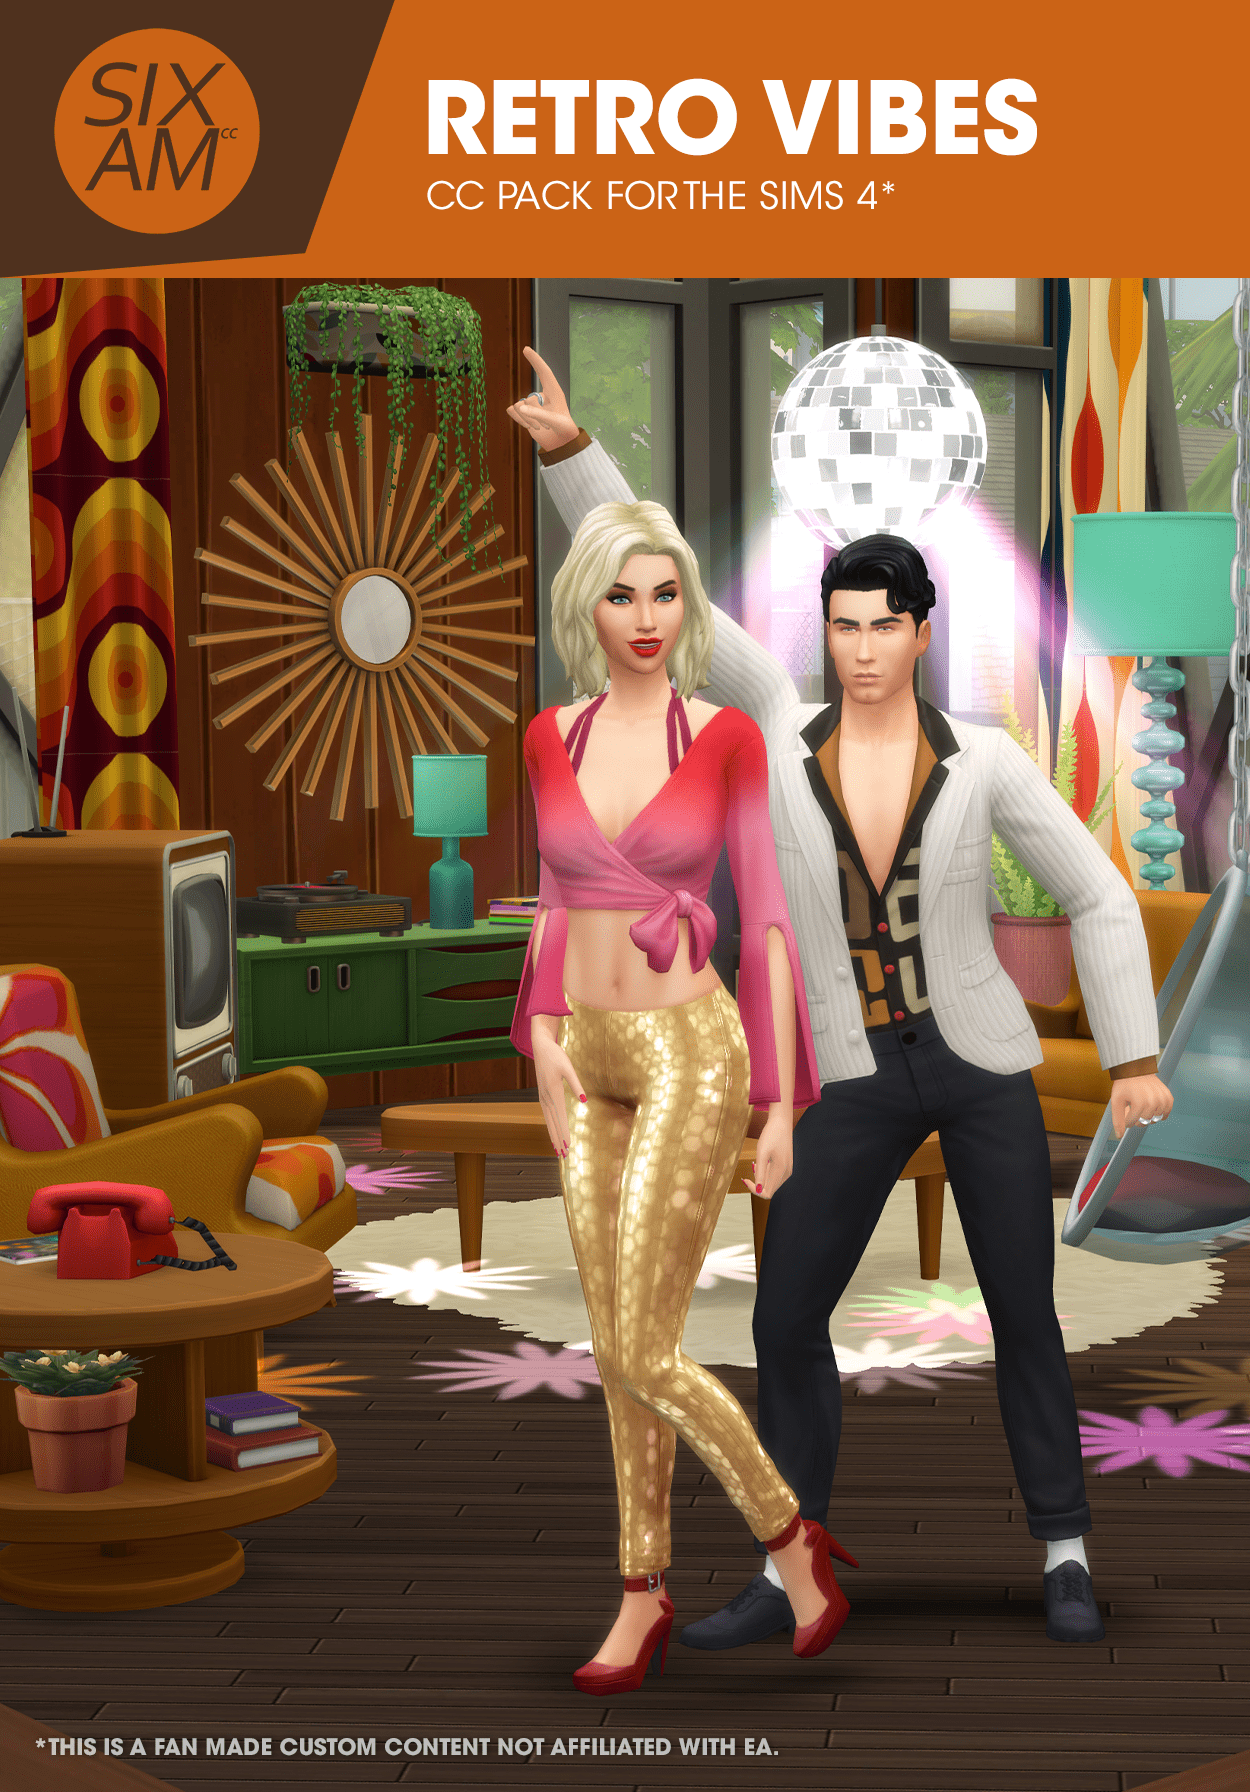 Retro Vibes (CC Pack for The Sims 4)